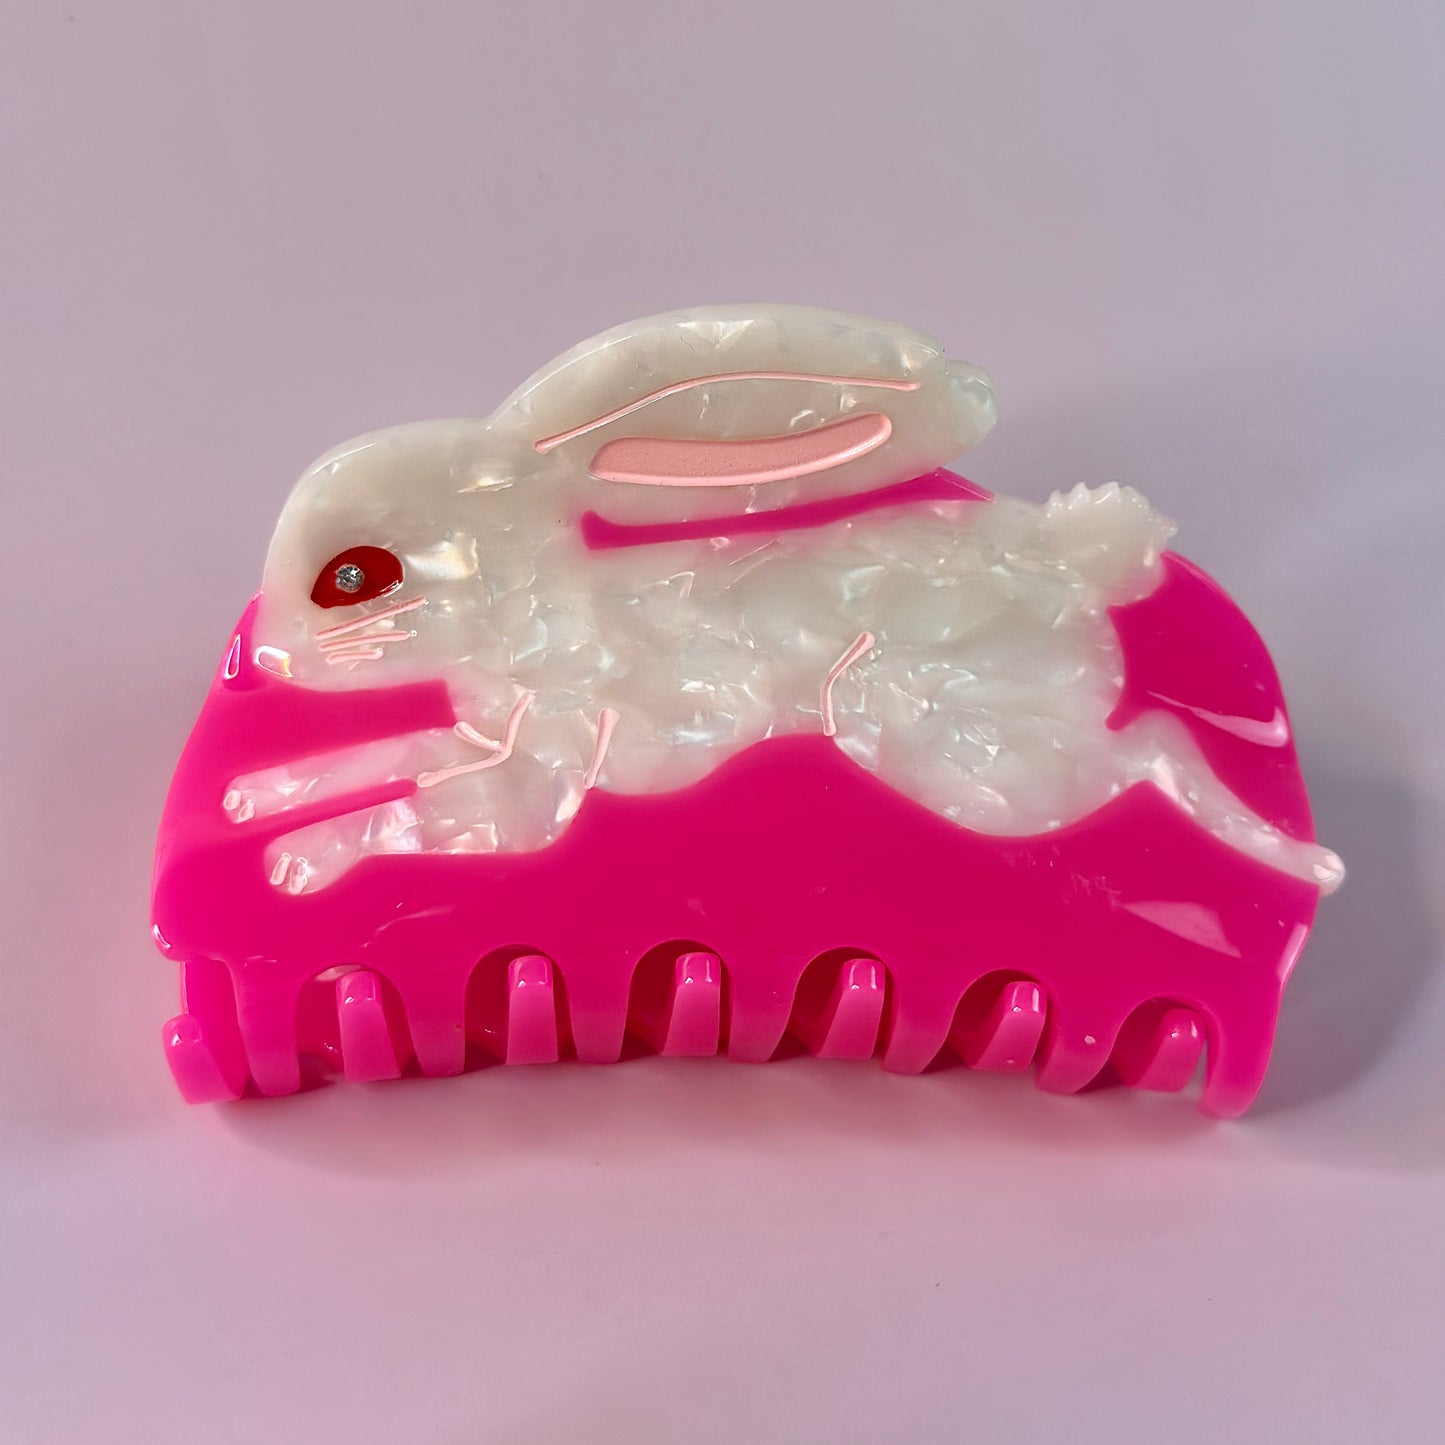 White bunny on a pink hair claw.